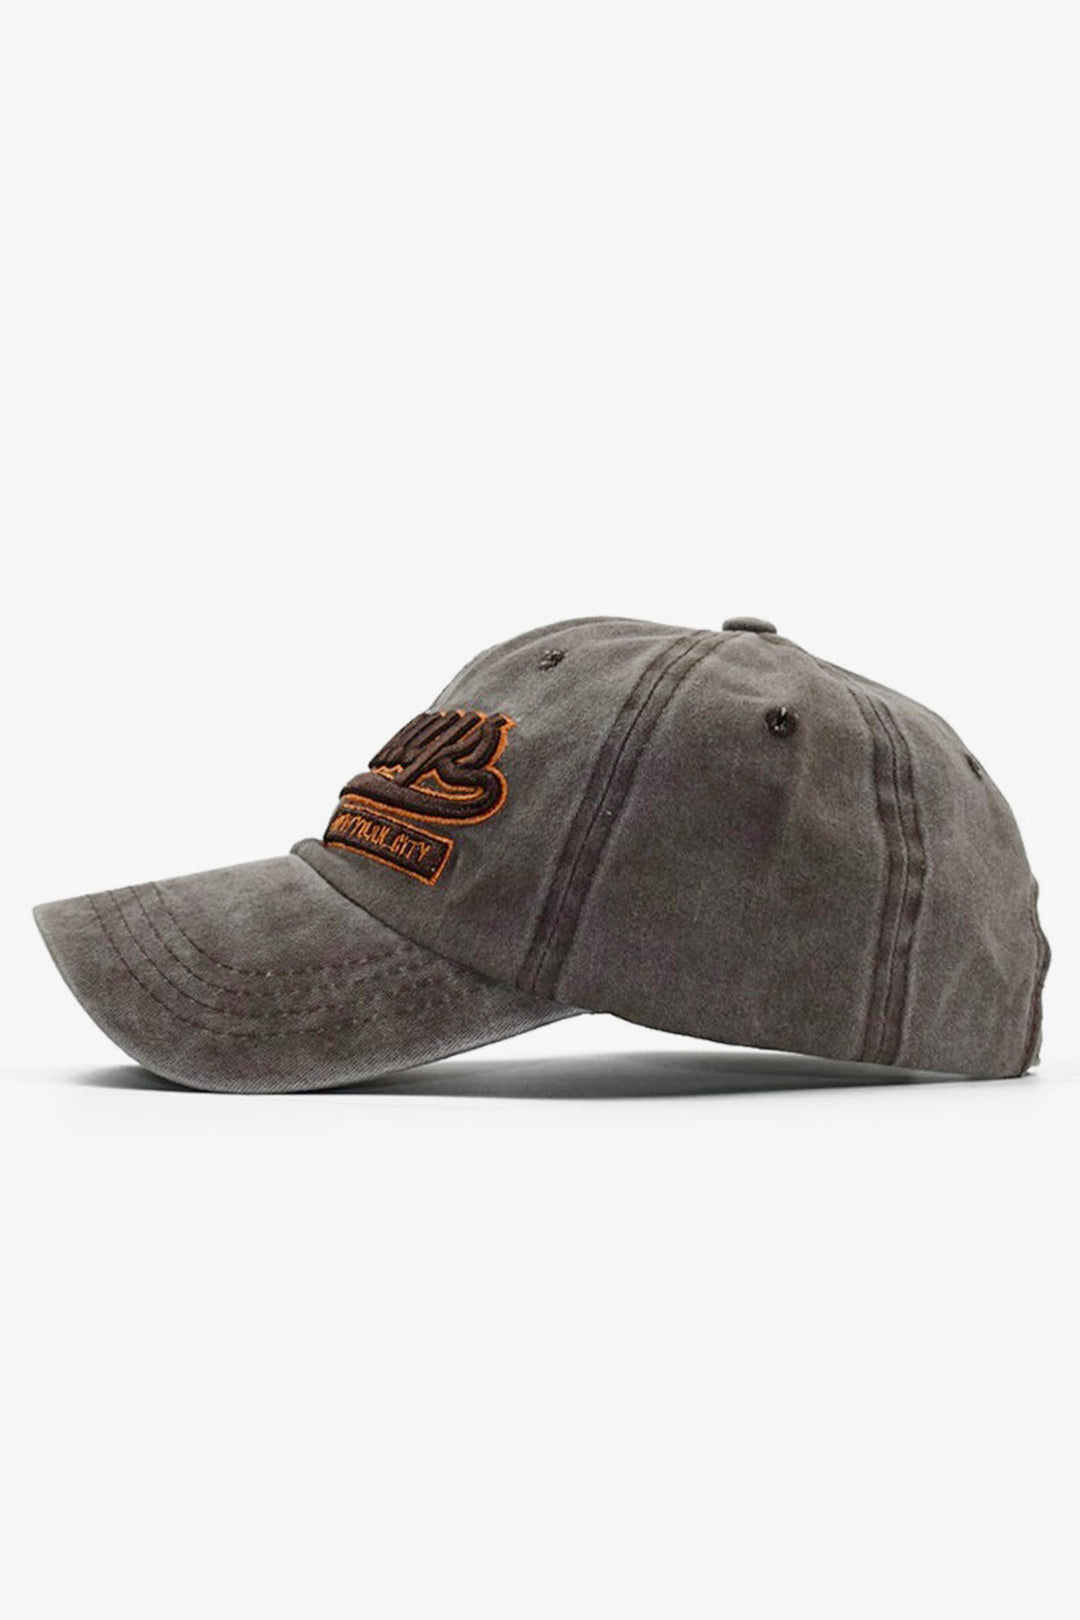 Embroidered Caps Online in Pakistan